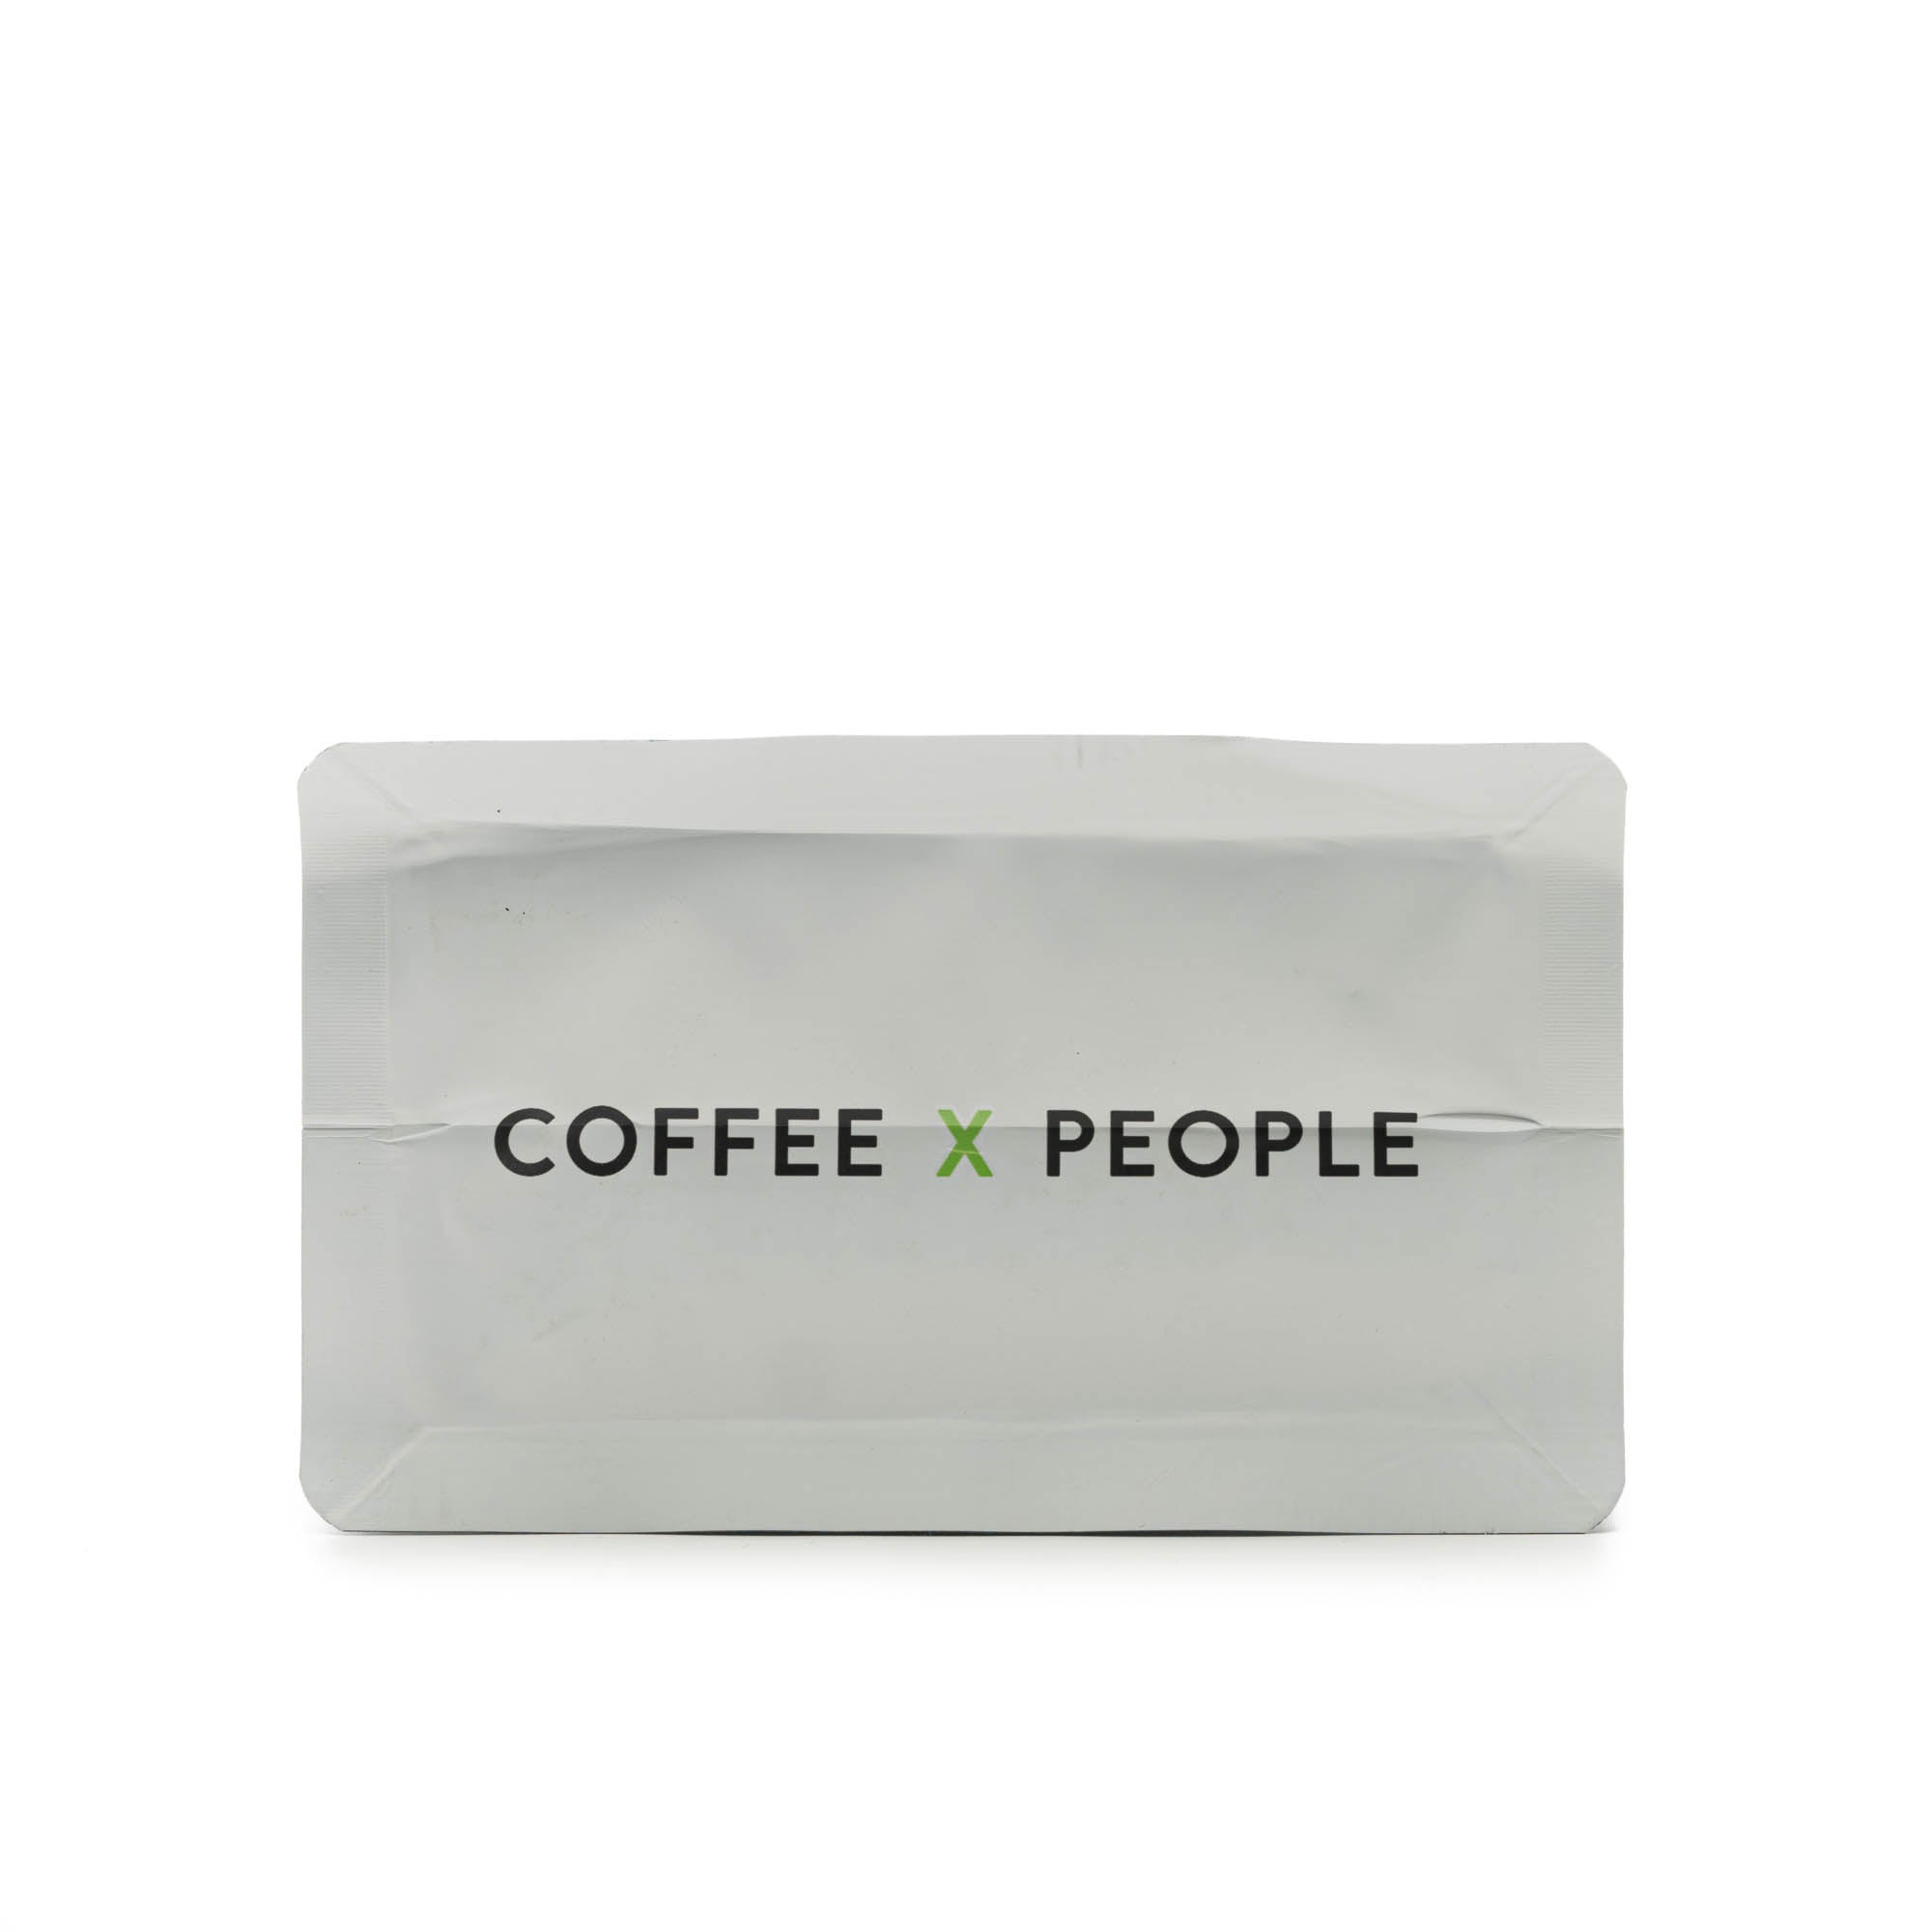 This image shows the bottom of our Single Origin Rwanda Coffee Bag, which reads “ coffee x people,” serving as a reminder of our mission to connect people over coffee.